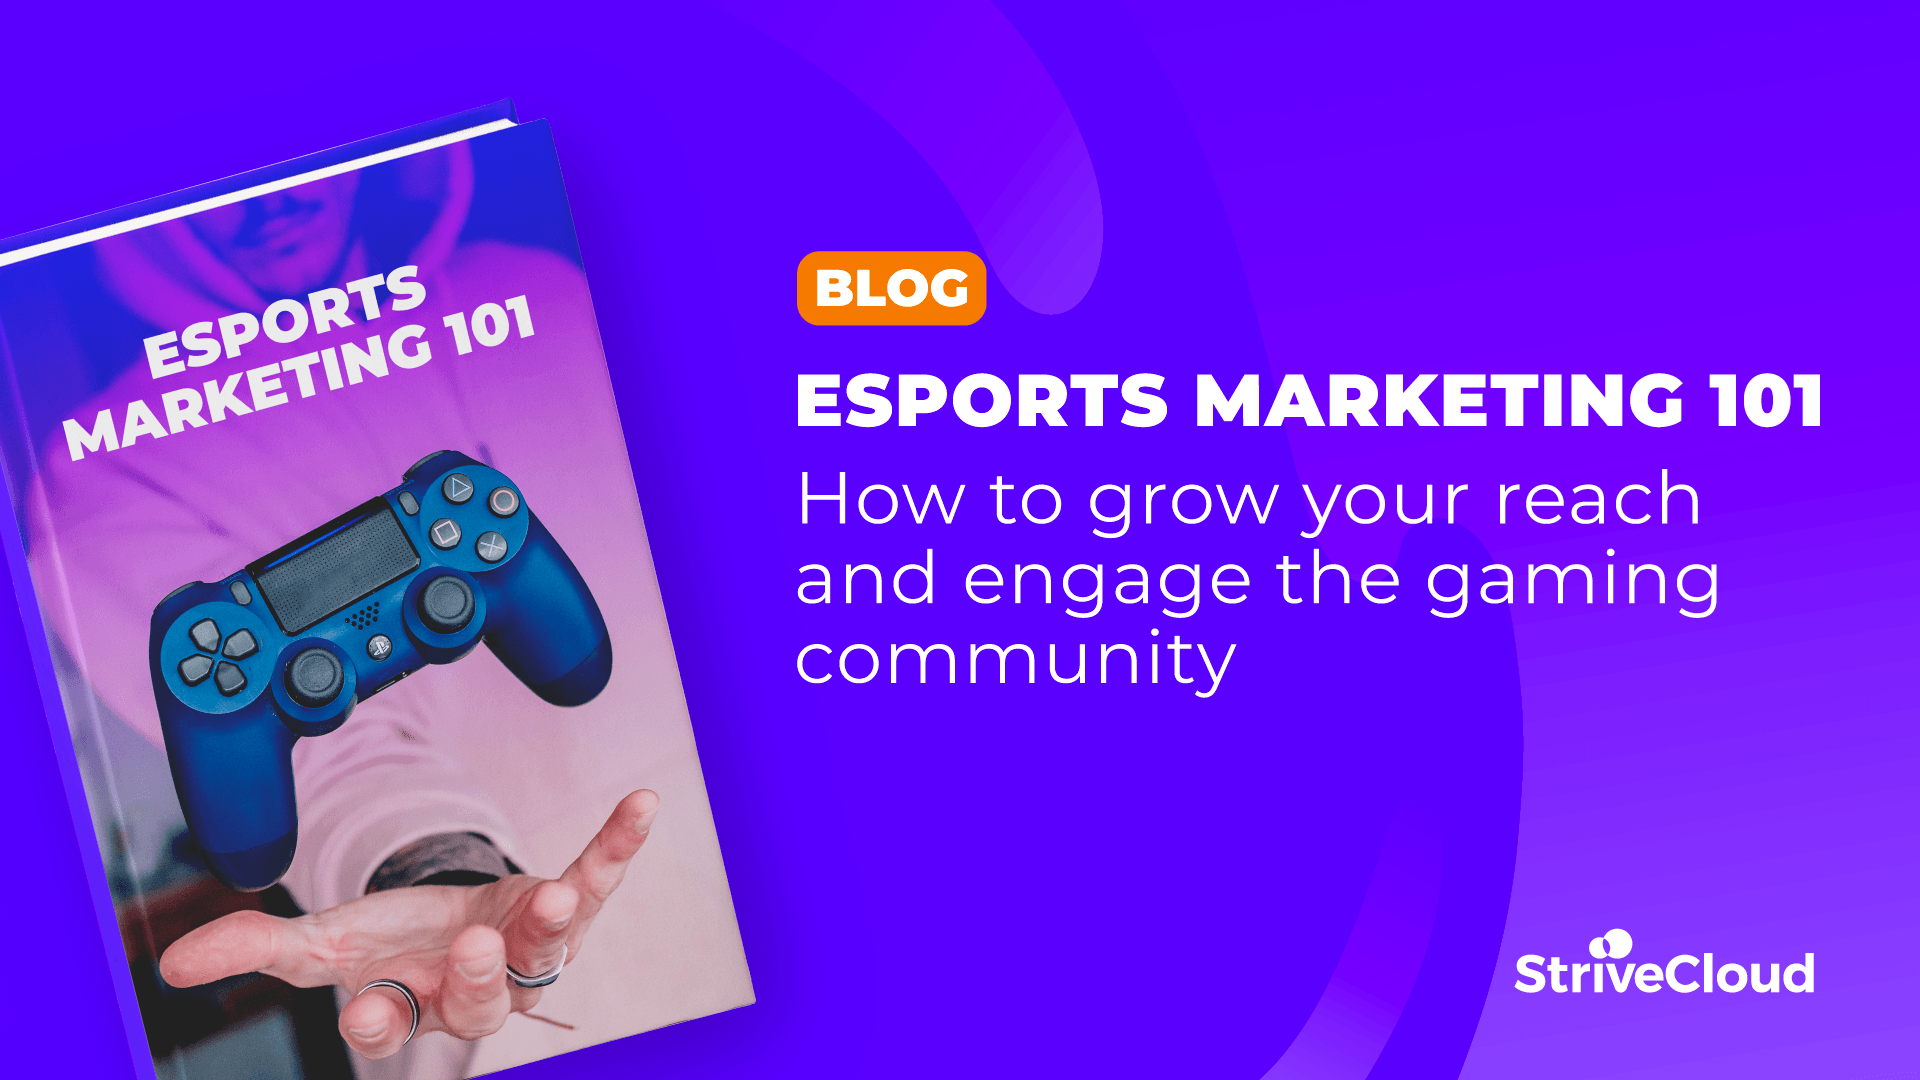 Esports marketing 101: How to grow your reach and engage the gaming community cover